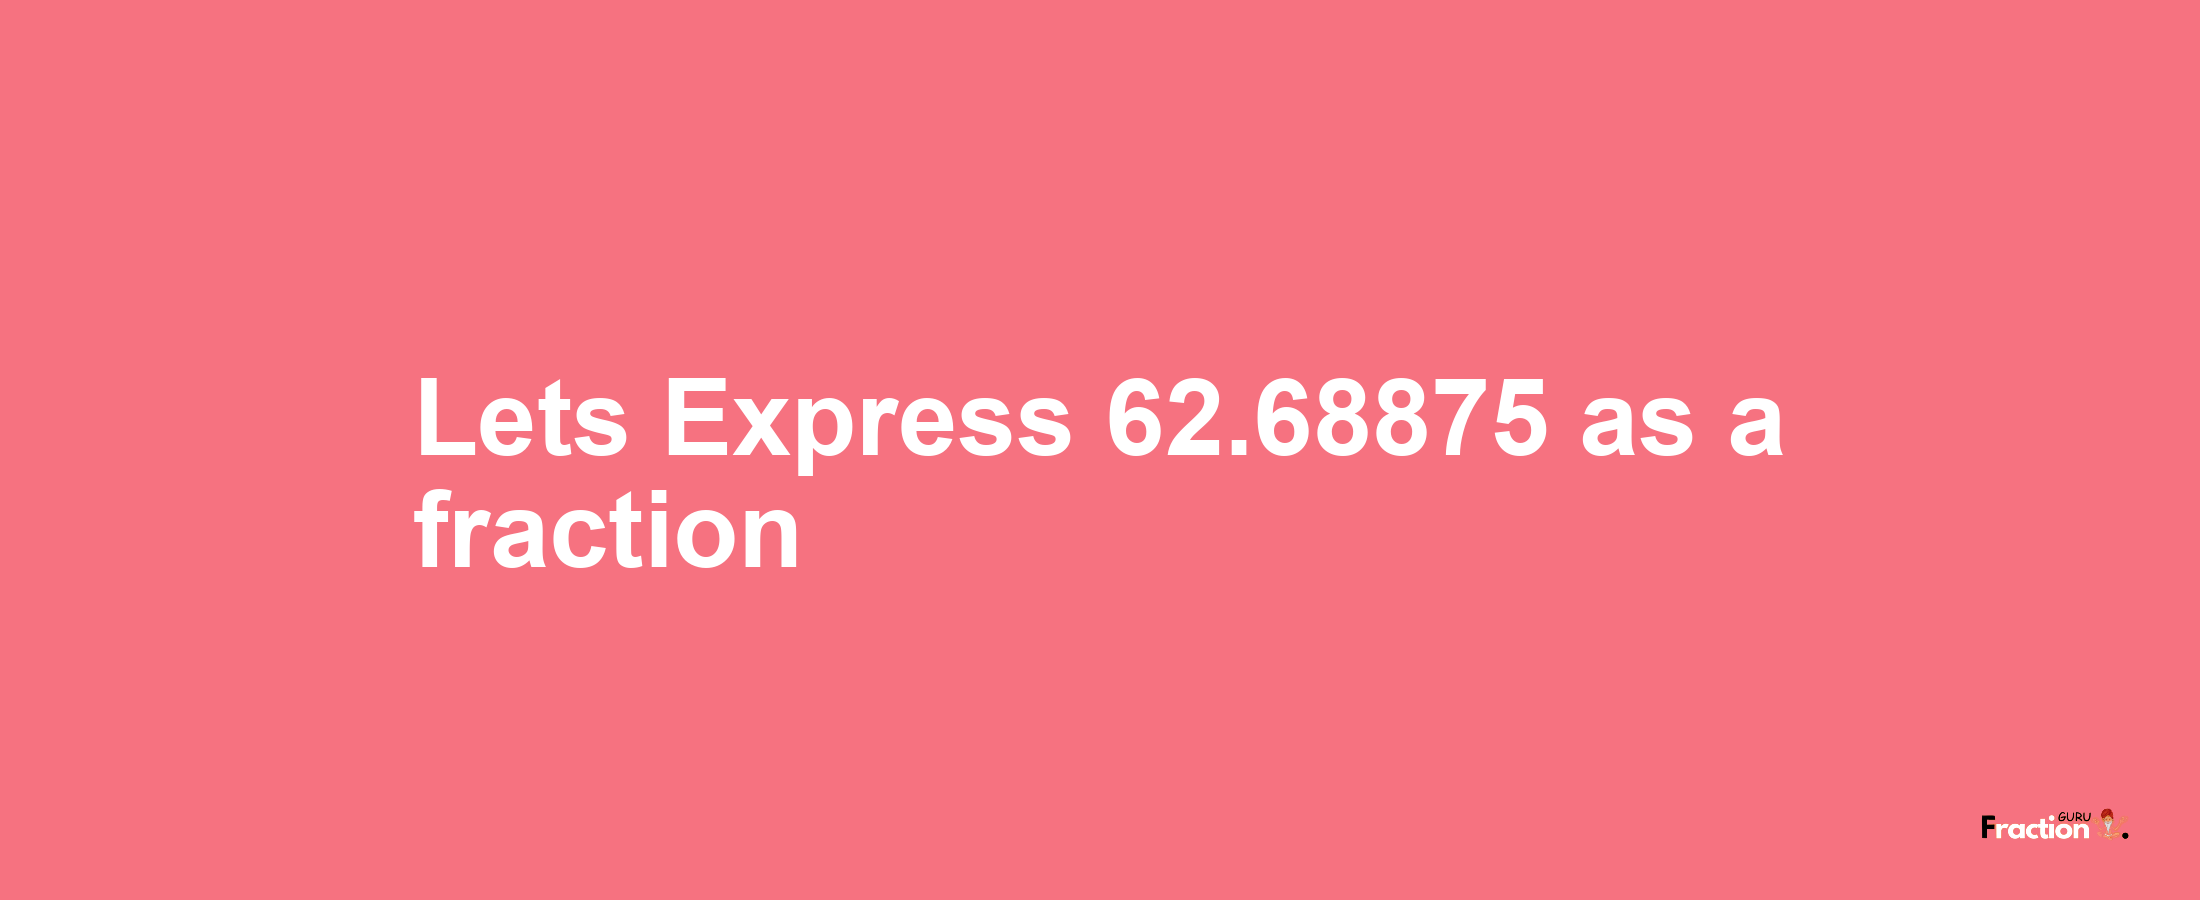 Lets Express 62.68875 as afraction